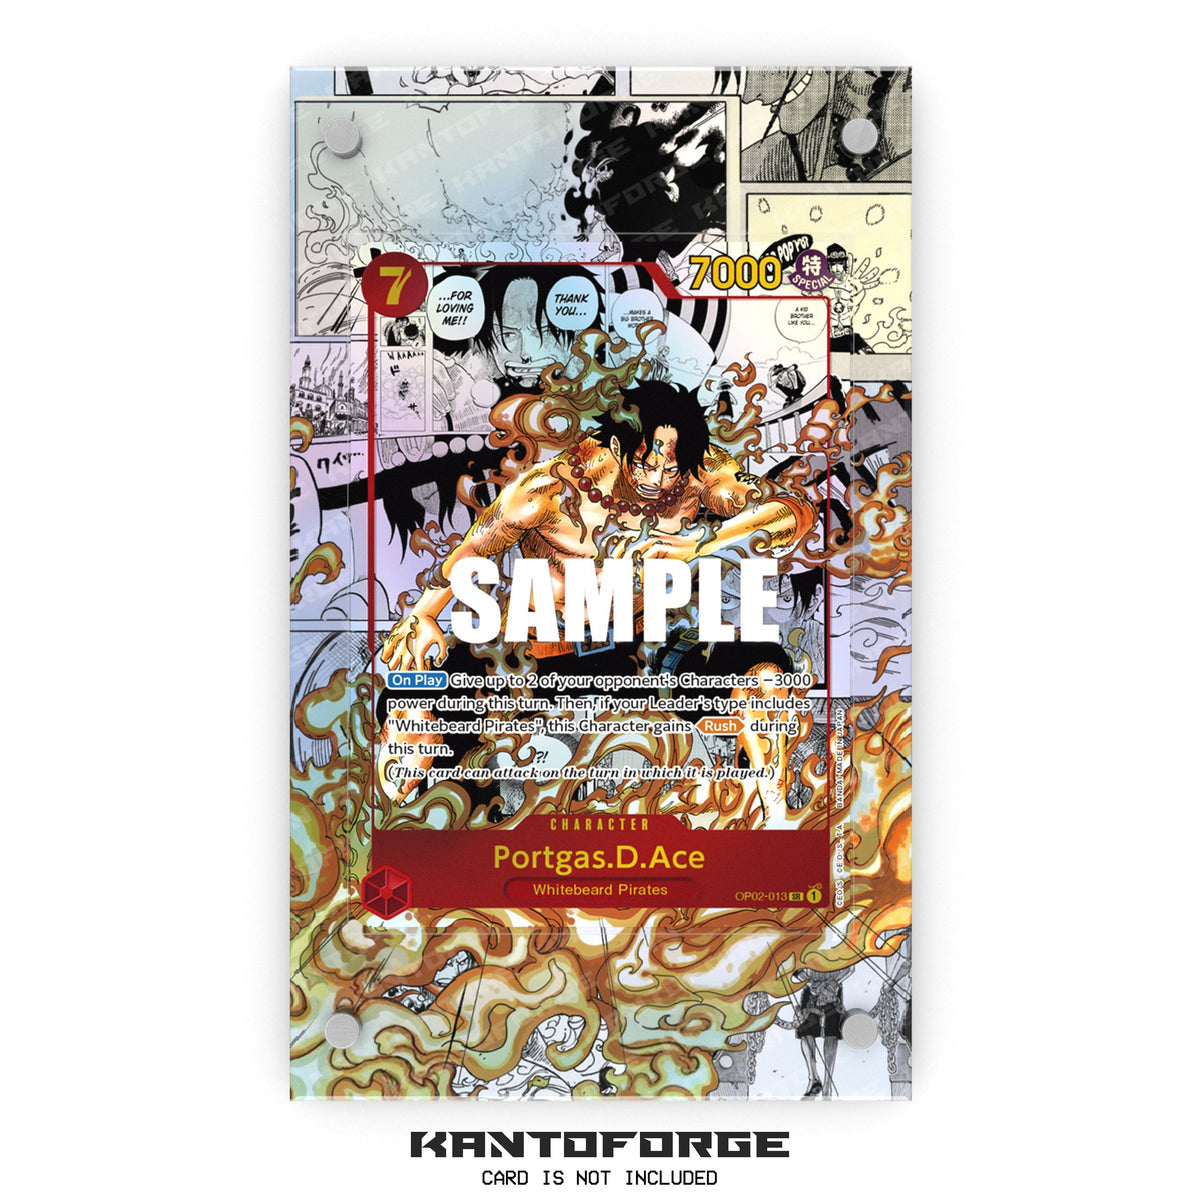 Ace OP02-013 - One Piece Extended Artwork Protective Card Display Case